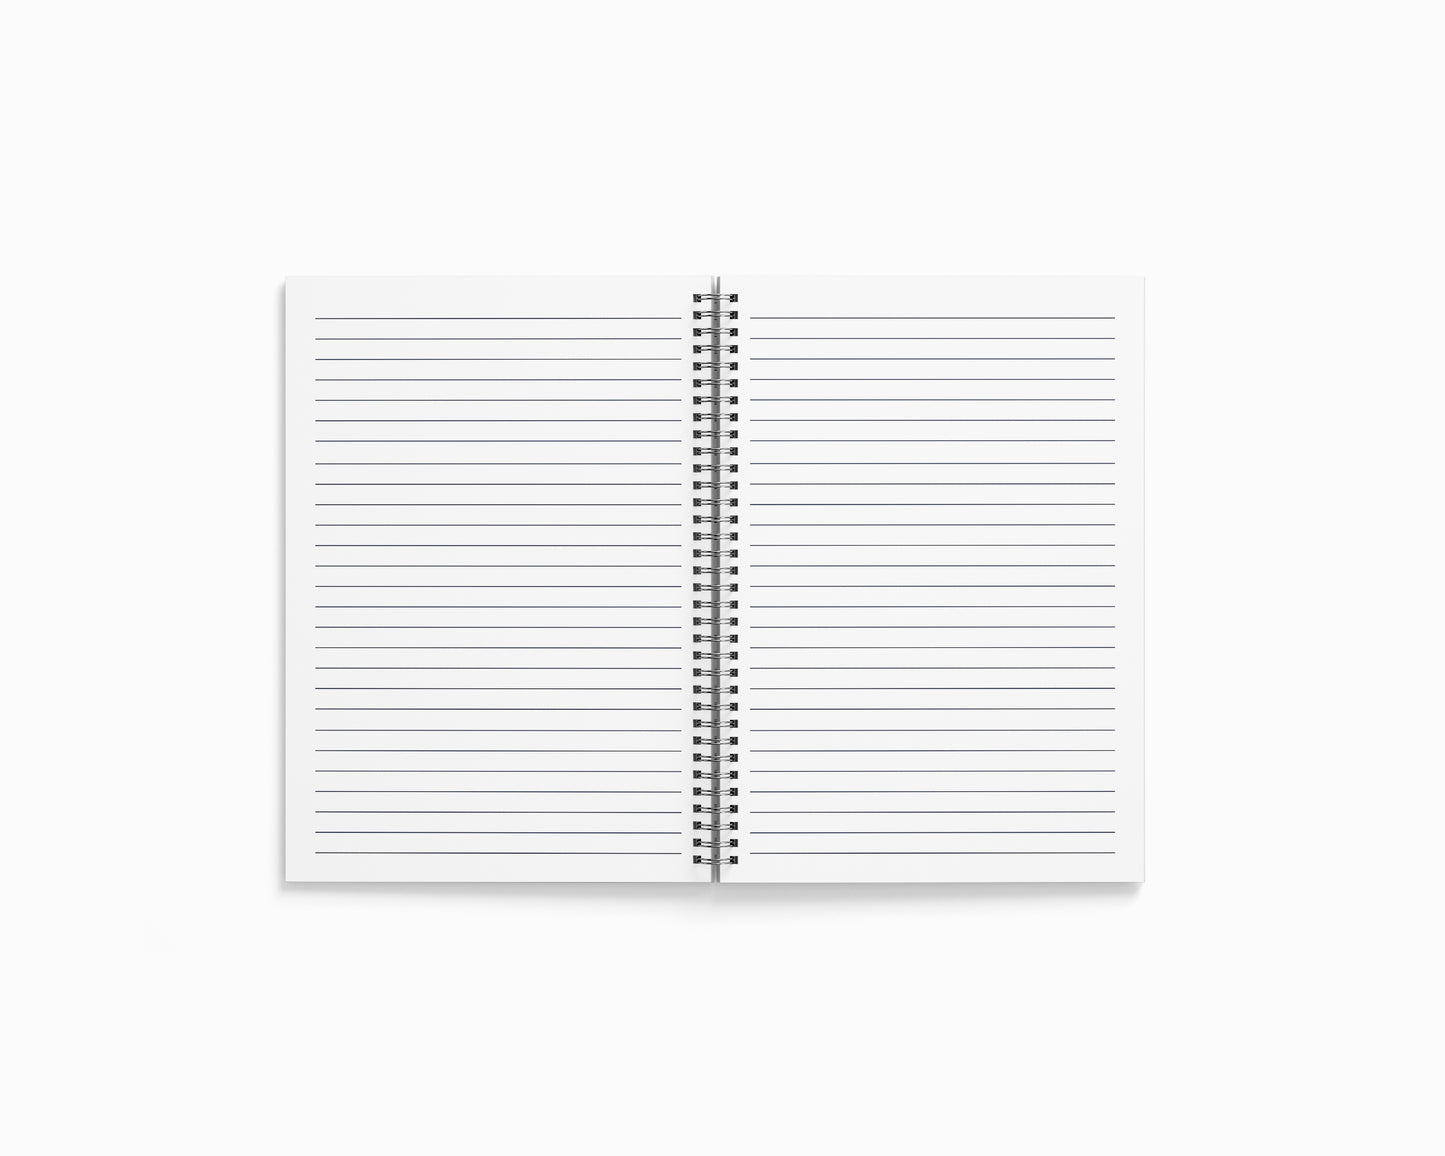 Zunheboto Notebook (A5 Size, 100 Pages, Ruled)